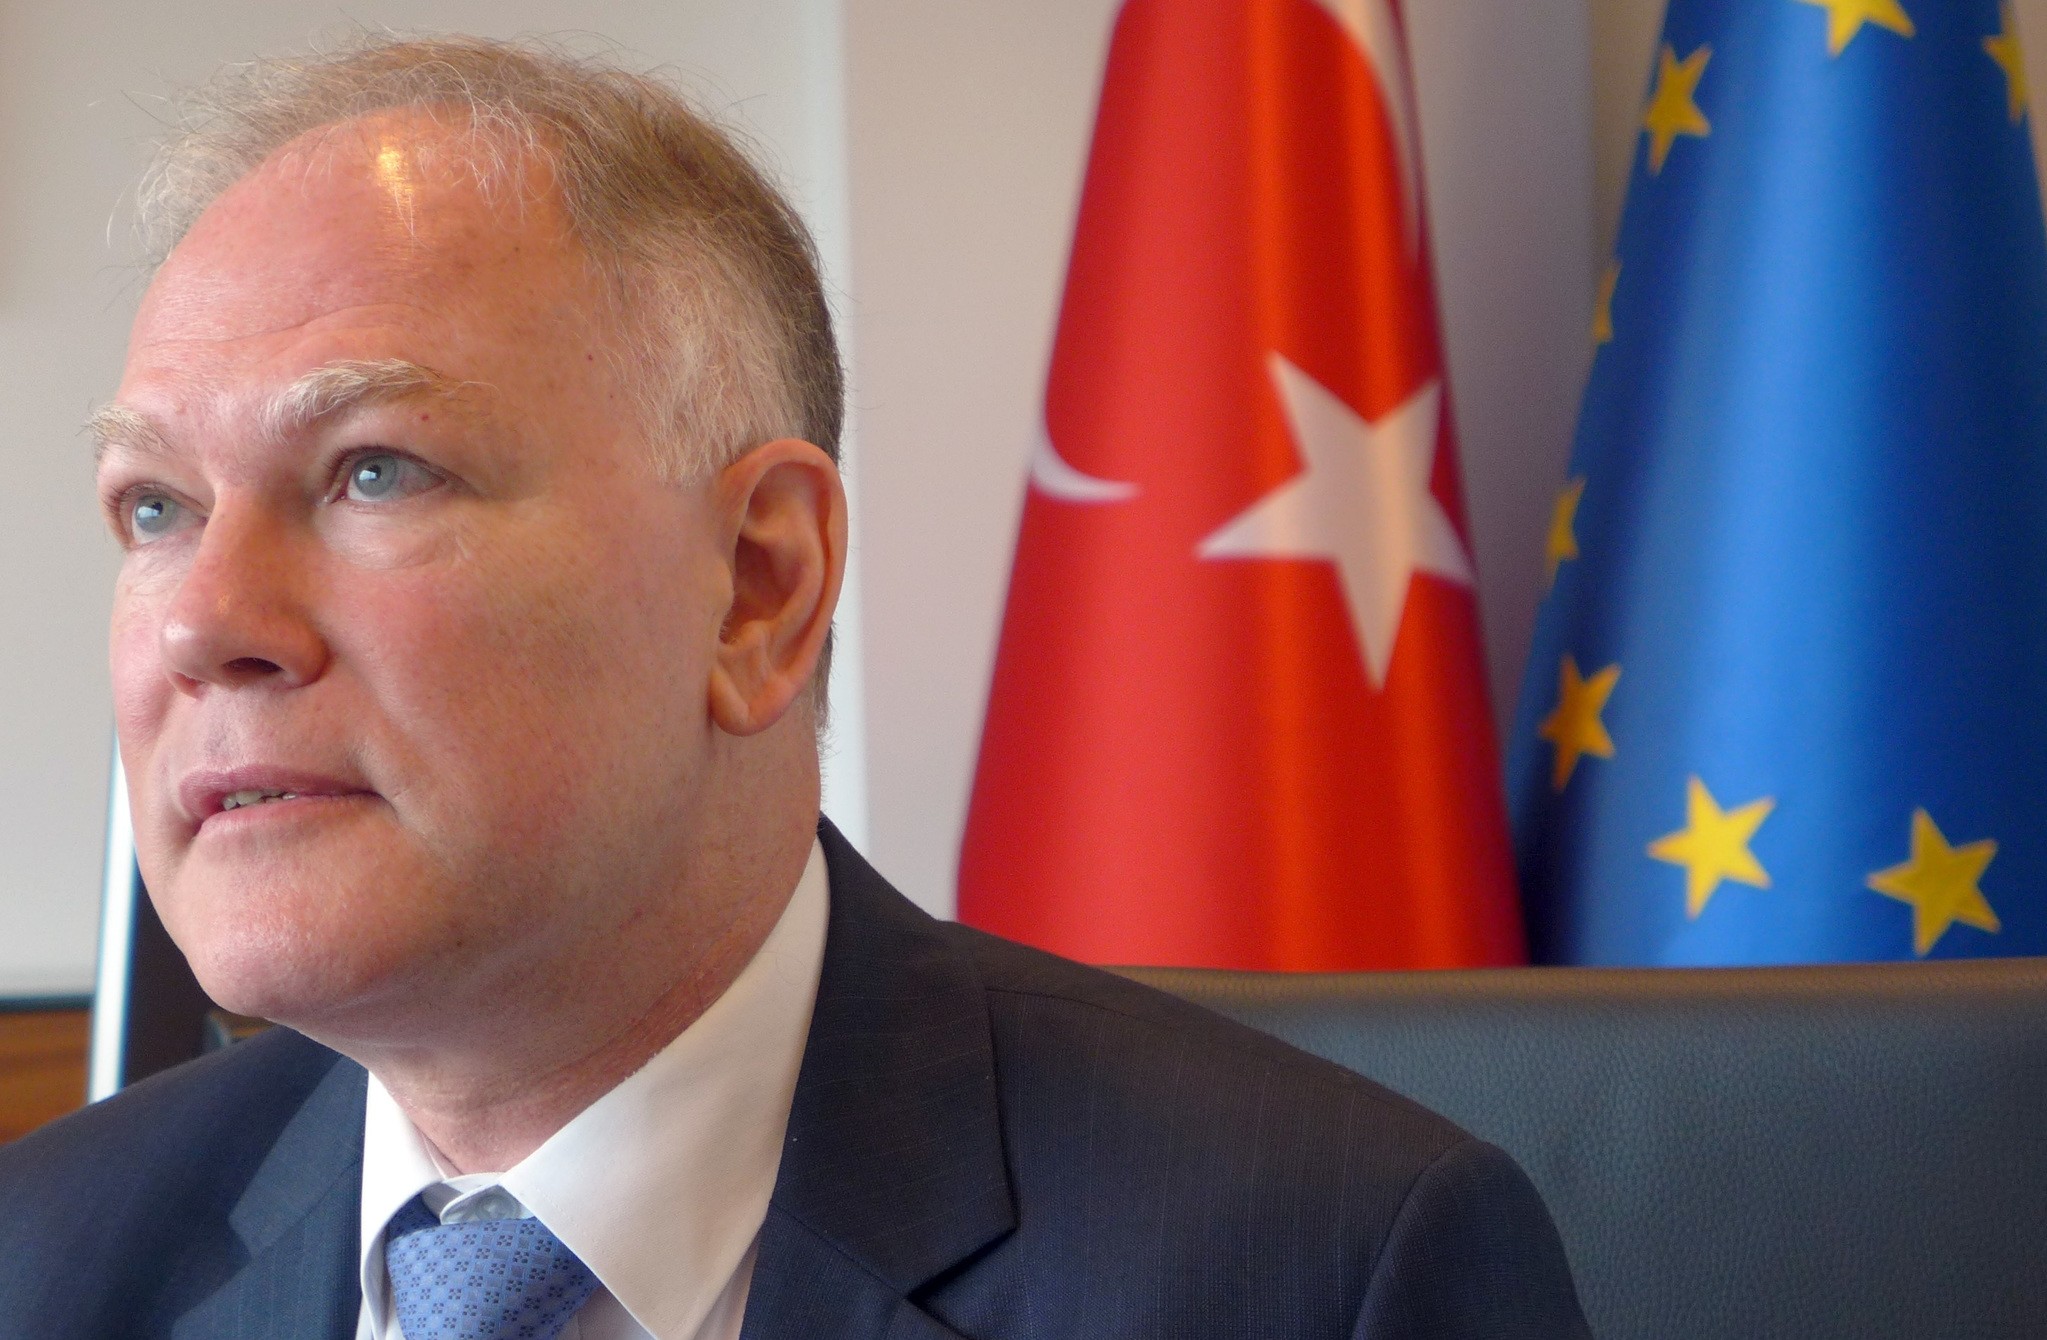 Turkey's Ambassador to the European Union Selim Yenel speaks during an interview at the Turkish embassy in Brussels on Thursday, Aug. 11, 2016. (AP Photo)